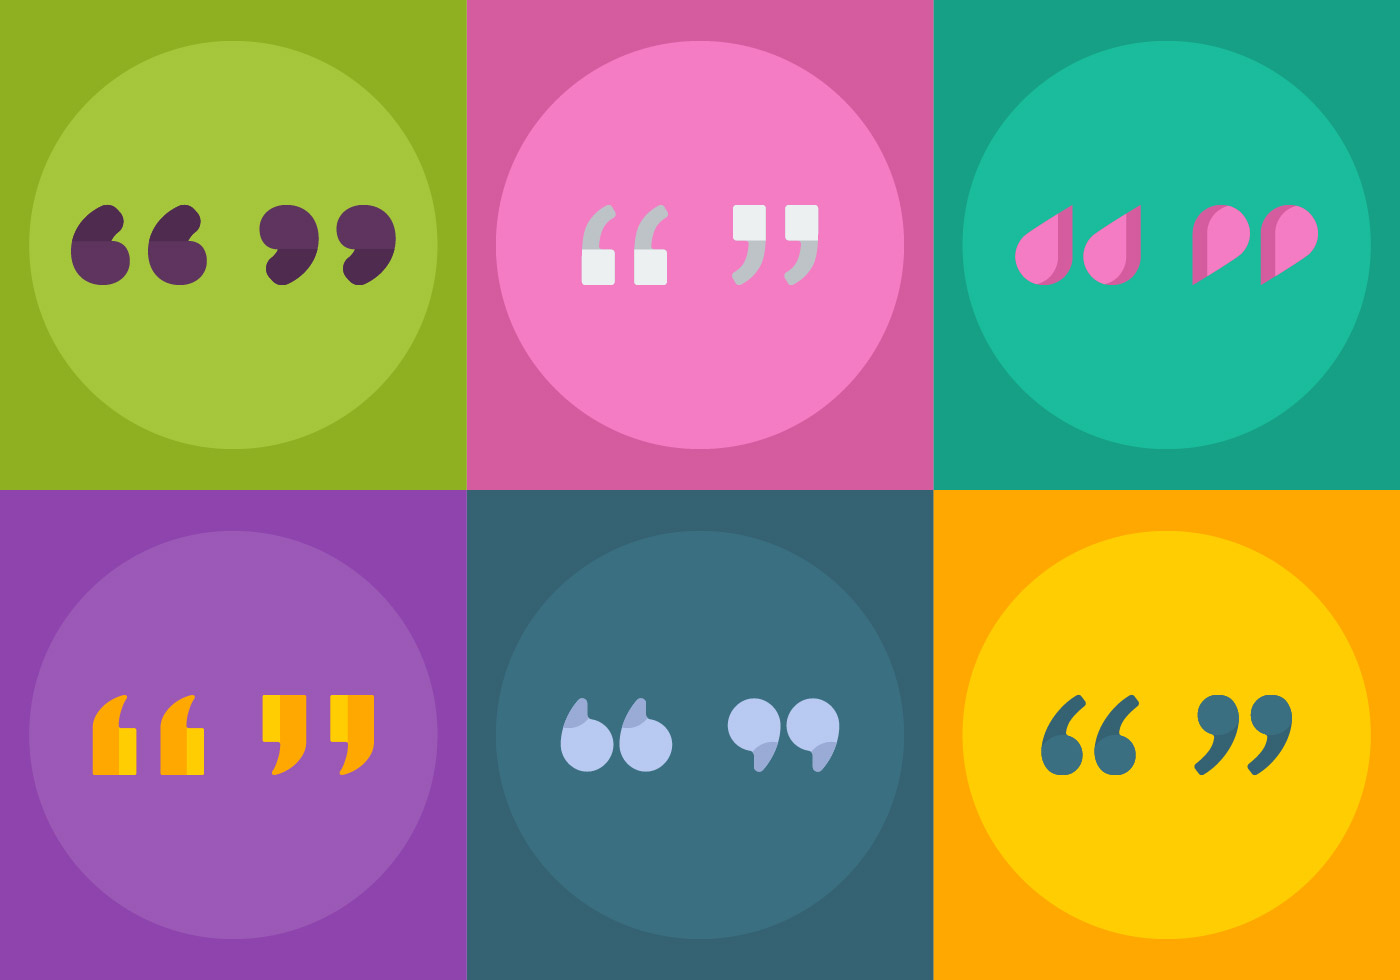 Free Vector Quotation Marks - Download Free Vectors ...